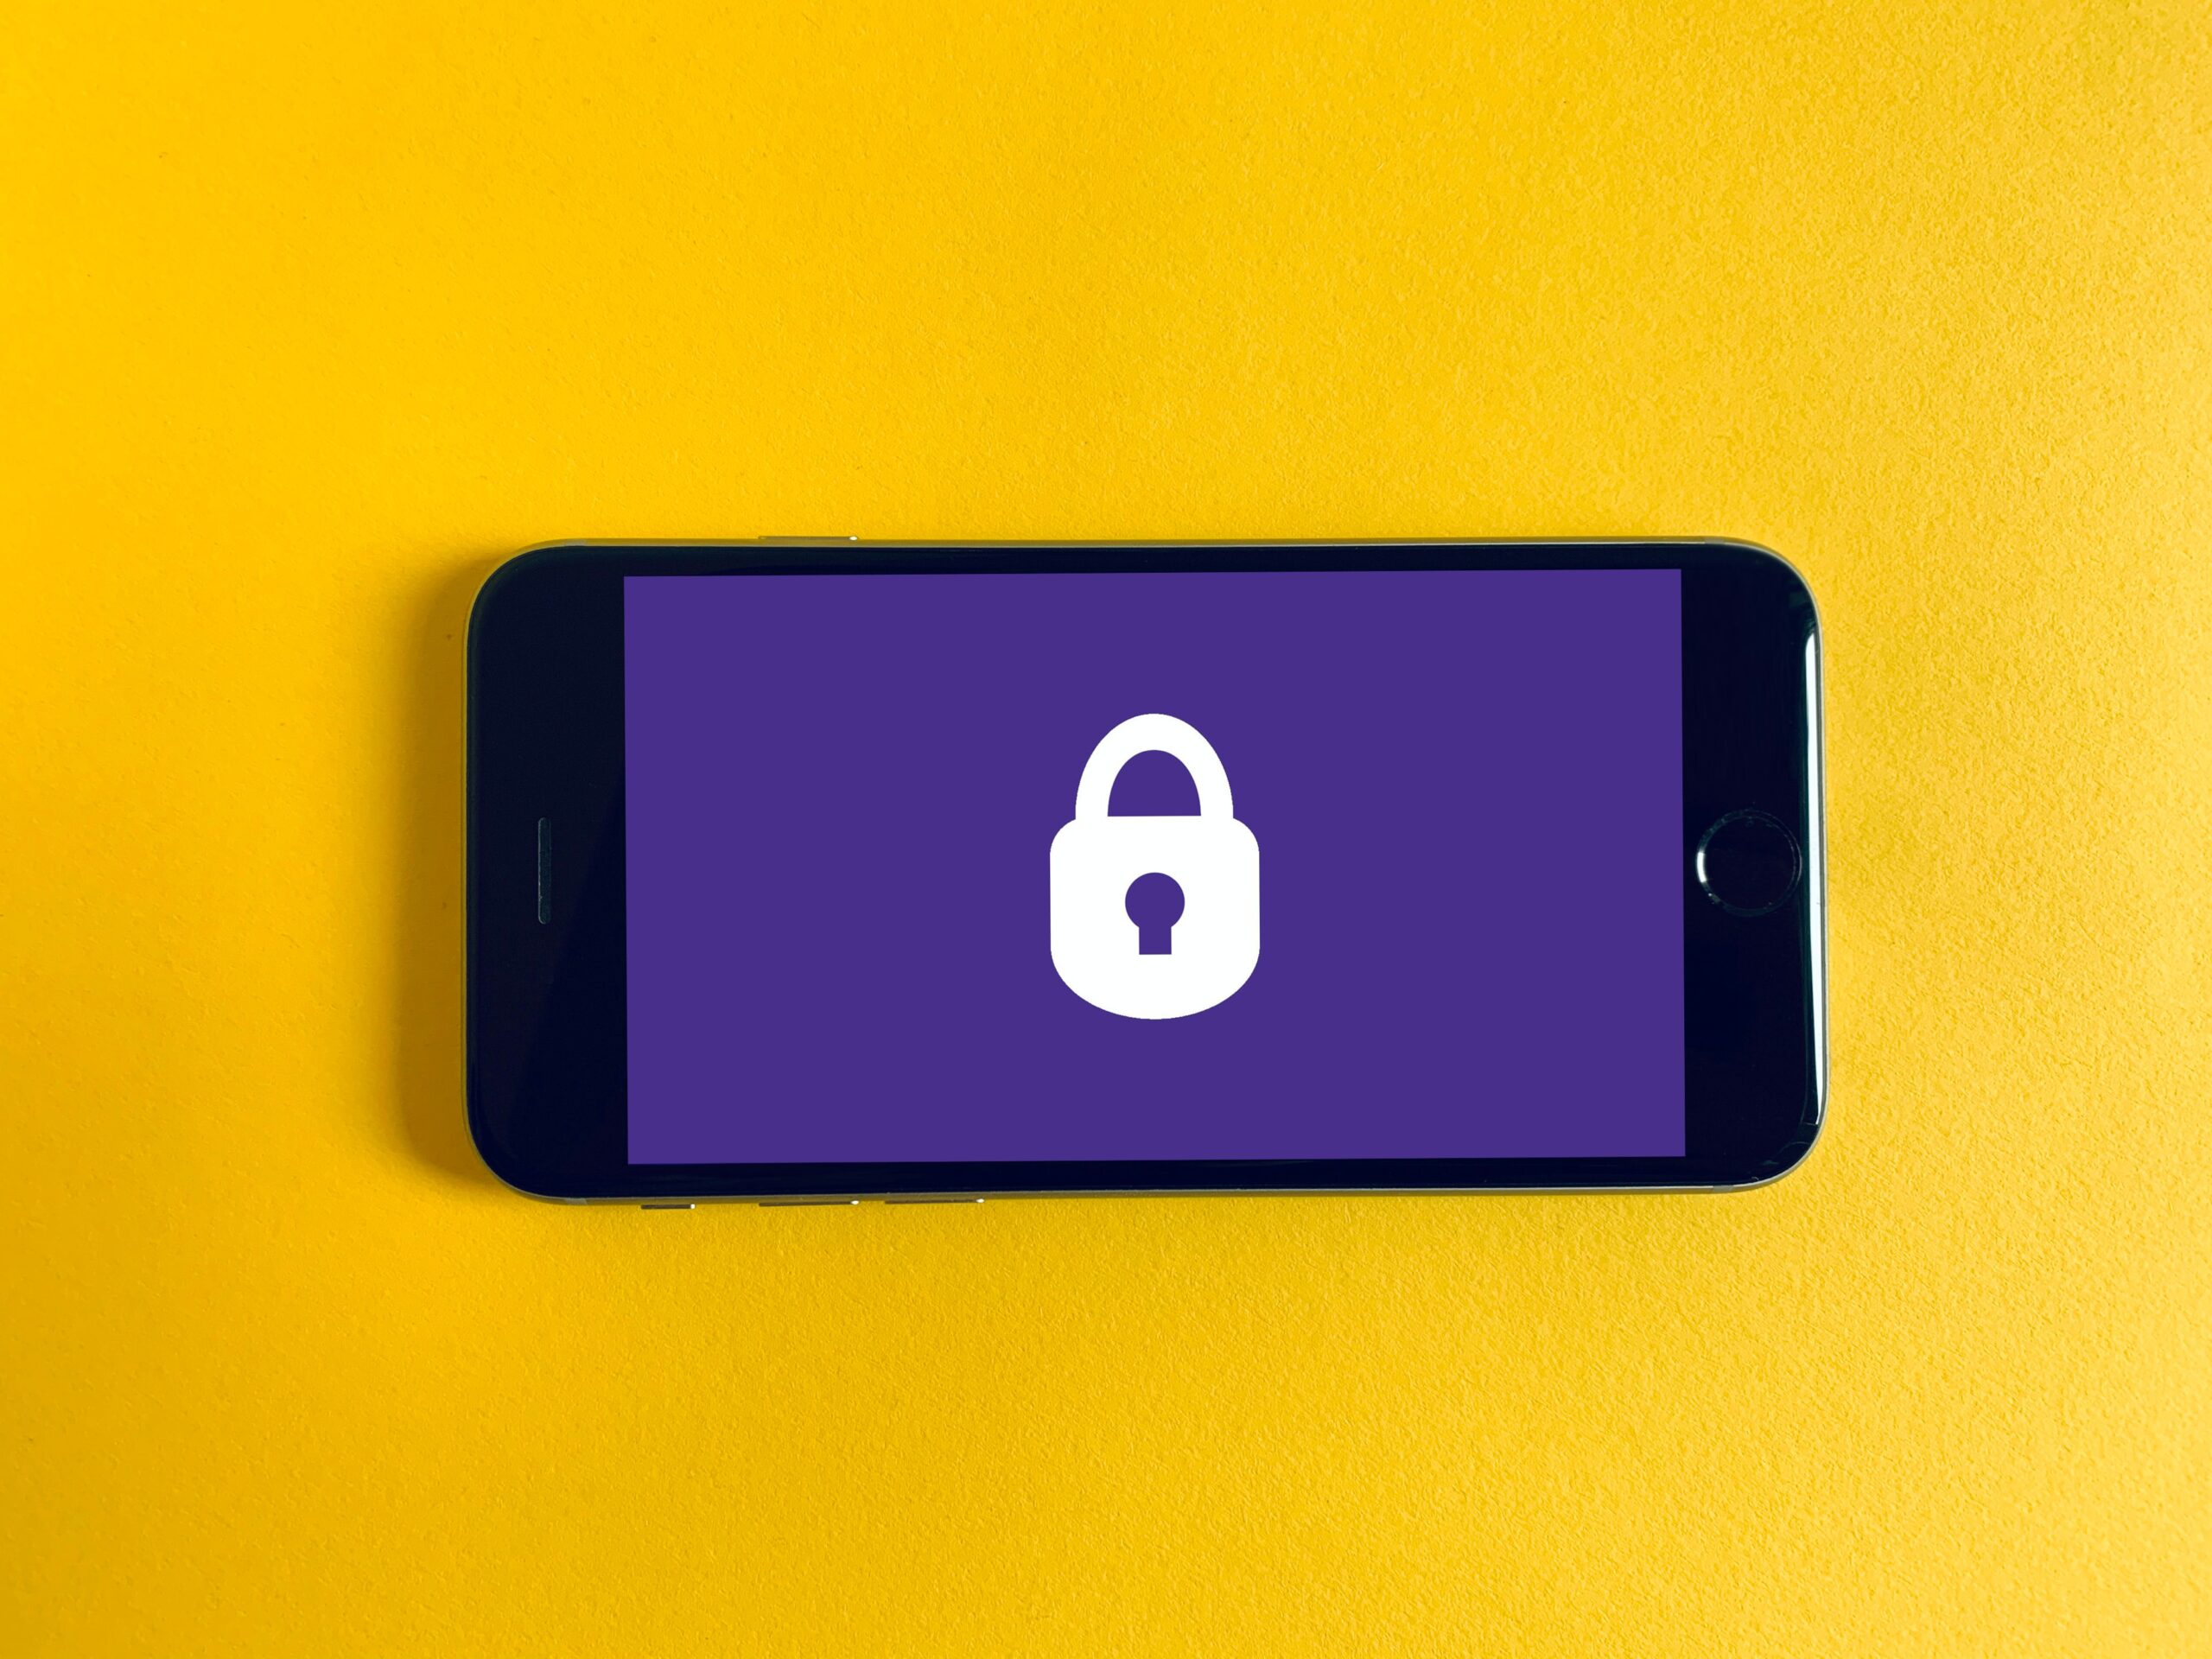 Security-lock-logo-on-smartphone-purple-phone-background-yellow-overall-background